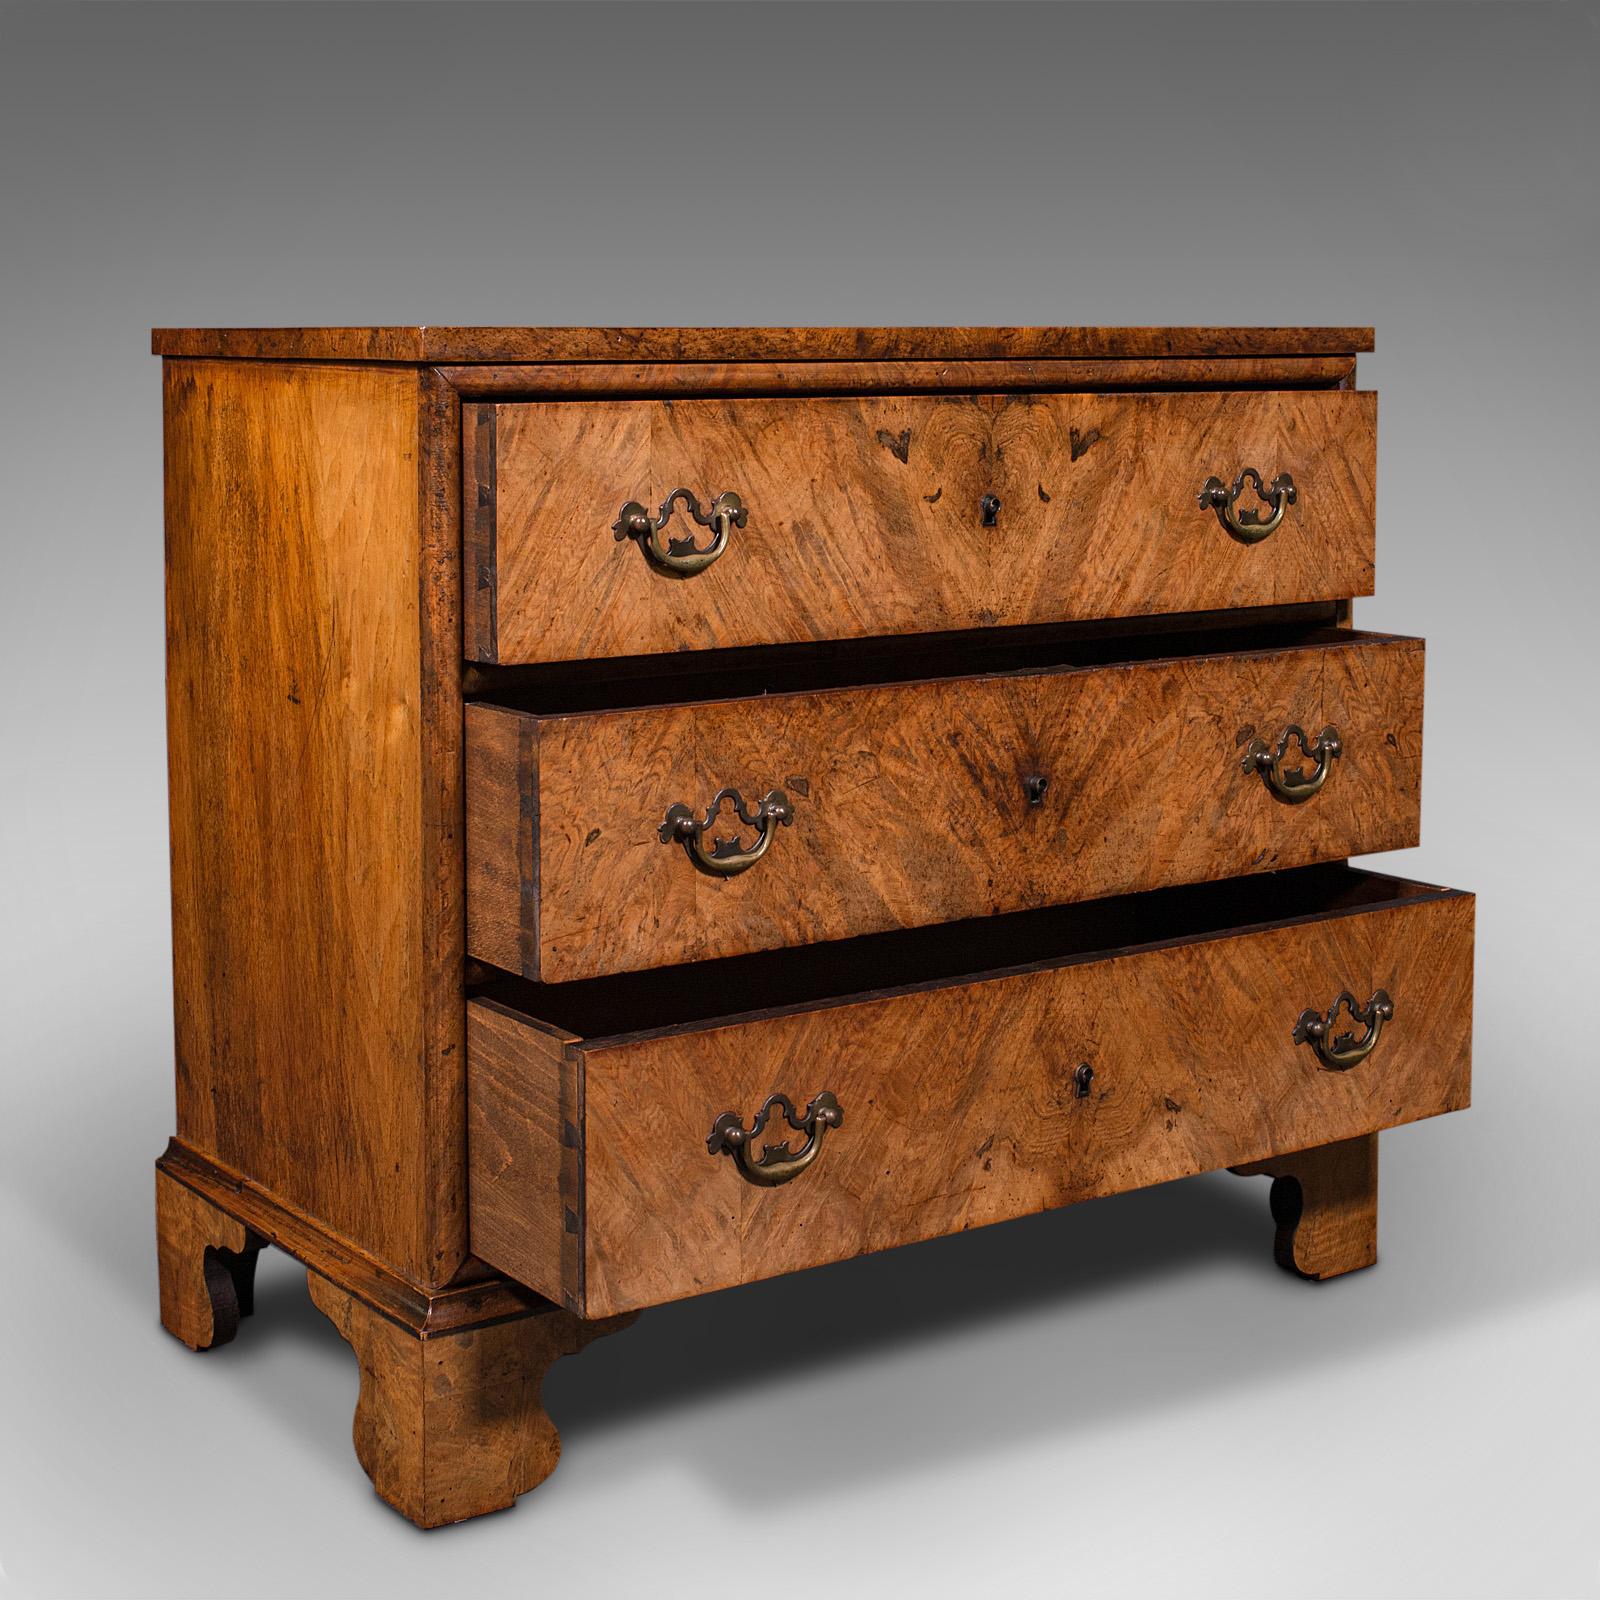 This is an antique gentleman's lowboy. An English, burr walnut chest of drawers, dating to the Georgian period and later, circa 1780.

Captivatingly figured example of fine Georgian craftsmanship
Displays a desirable aged patina and in good